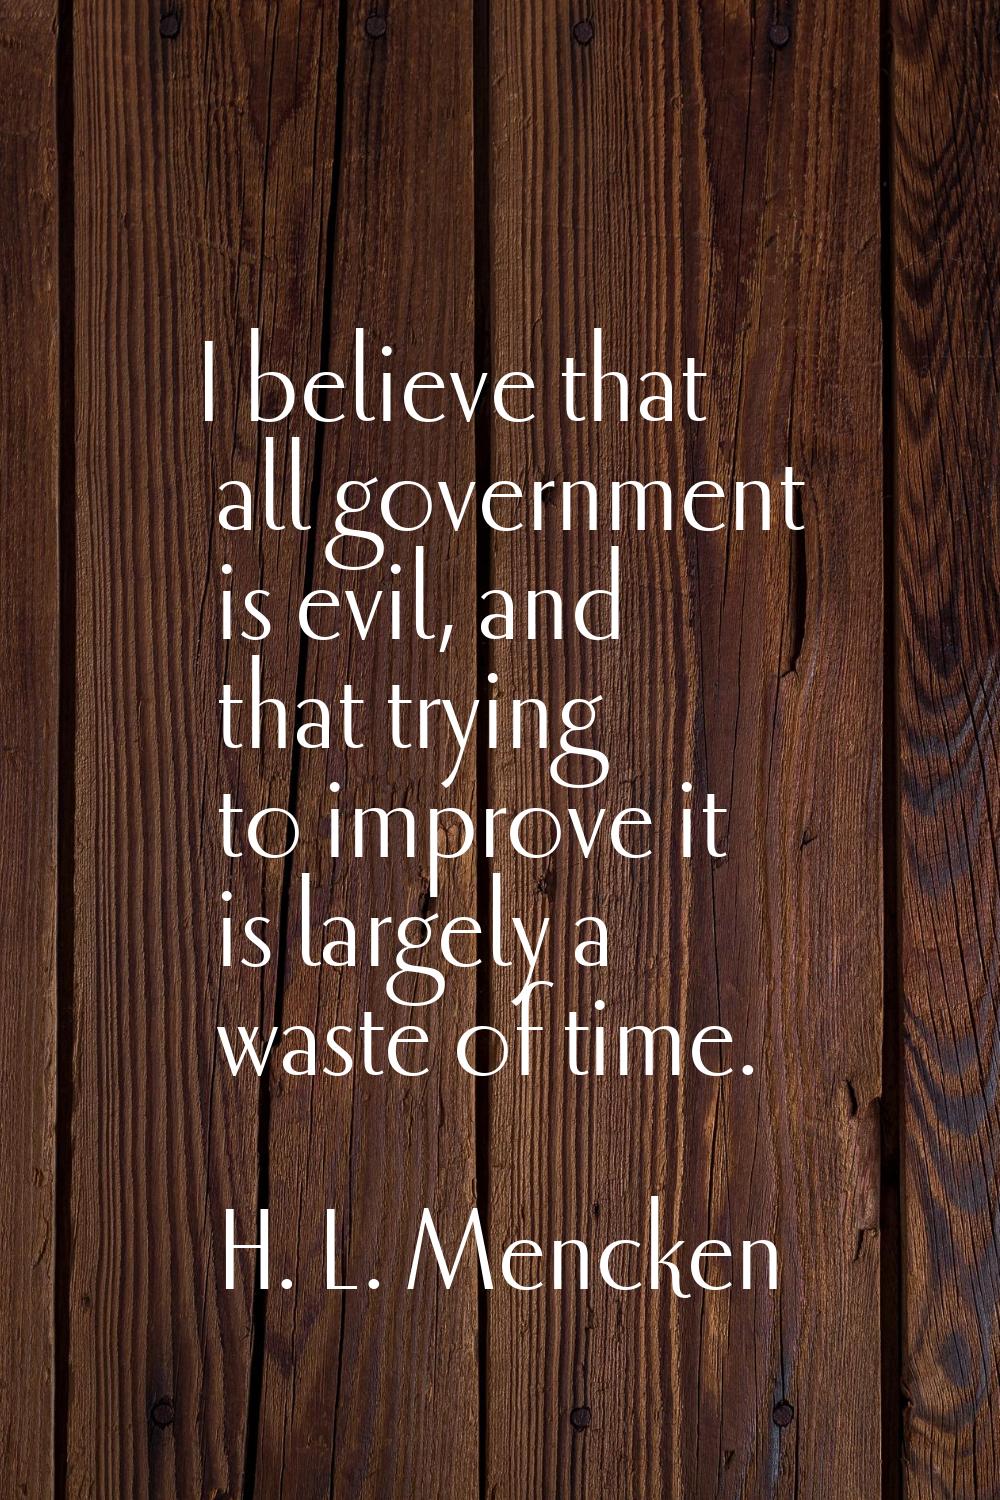 I believe that all government is evil, and that trying to improve it is largely a waste of time.